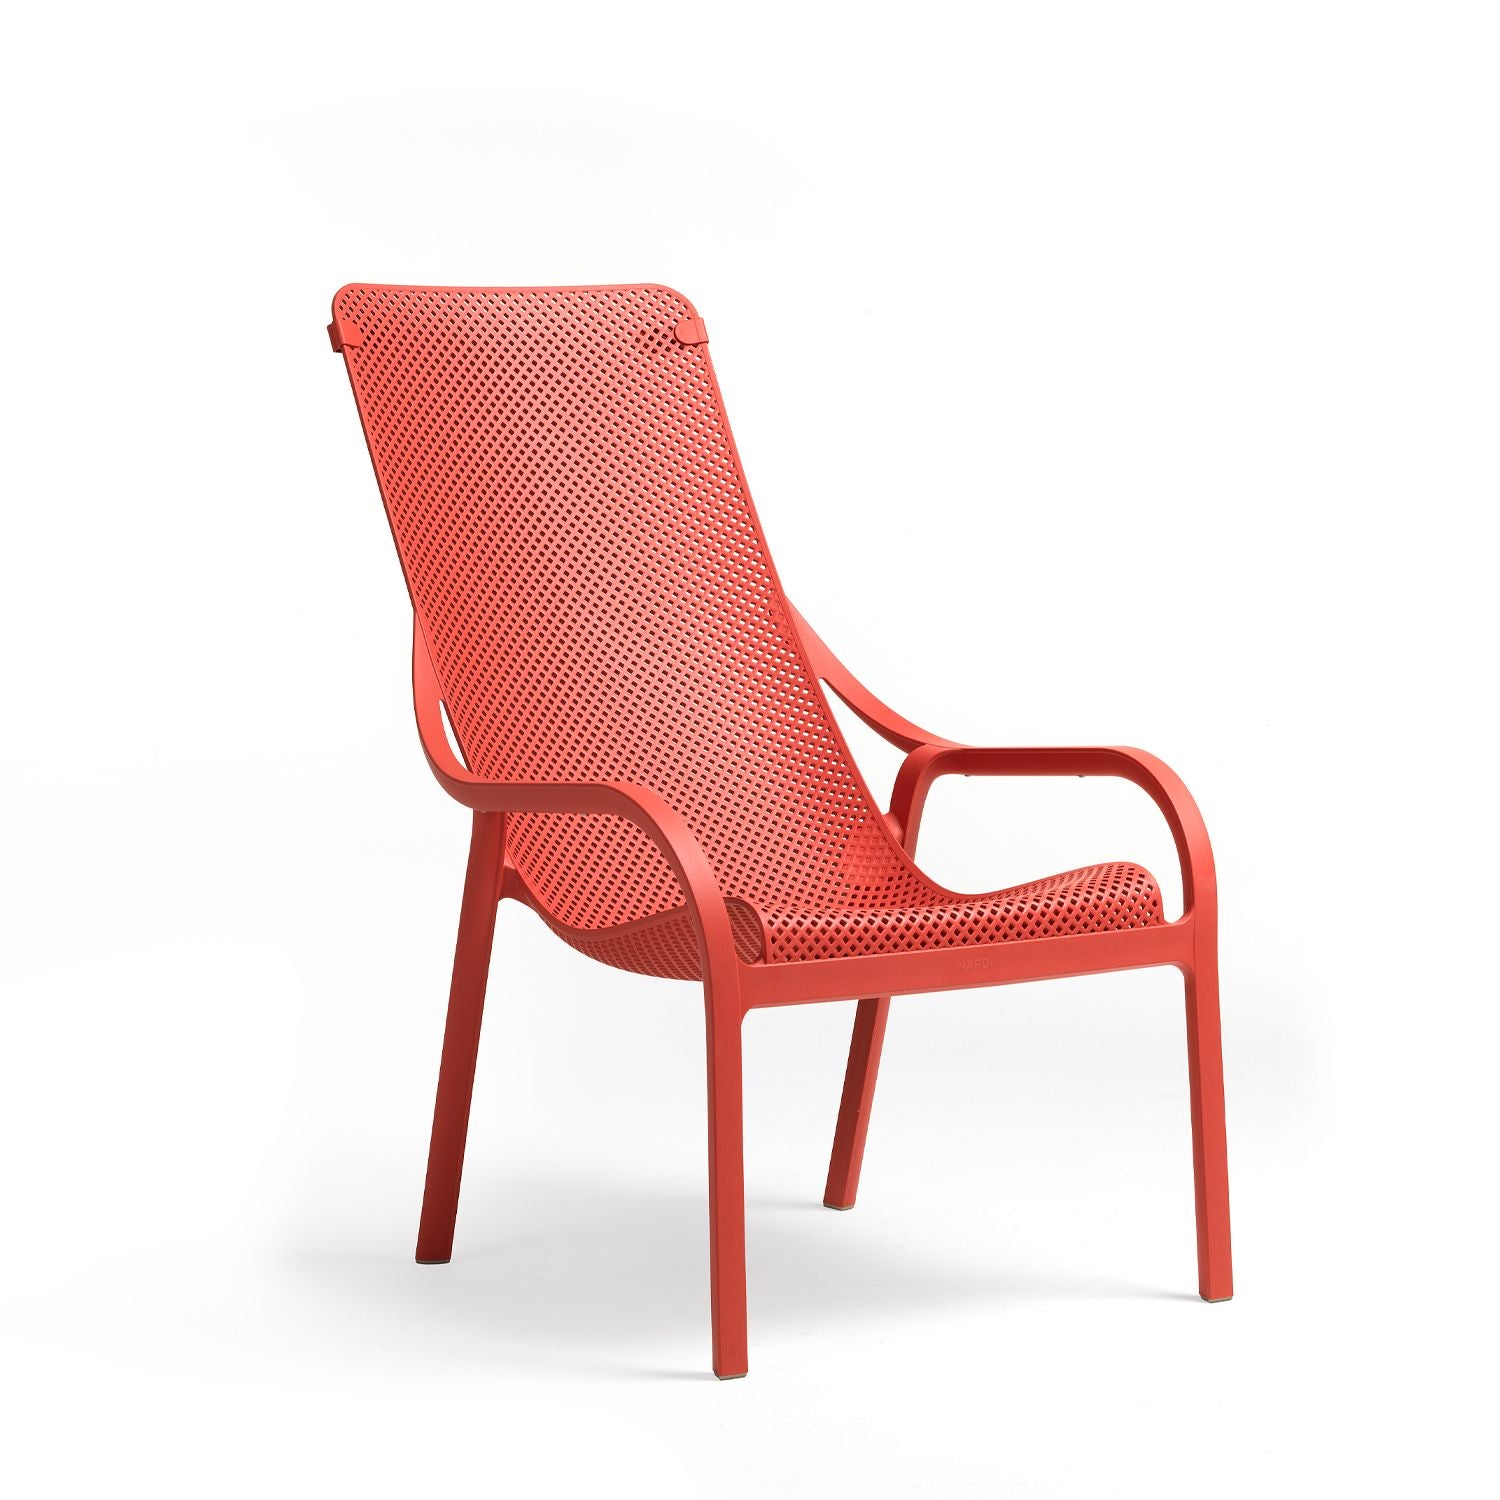 Net Lounge Chair By Nardi - Coral